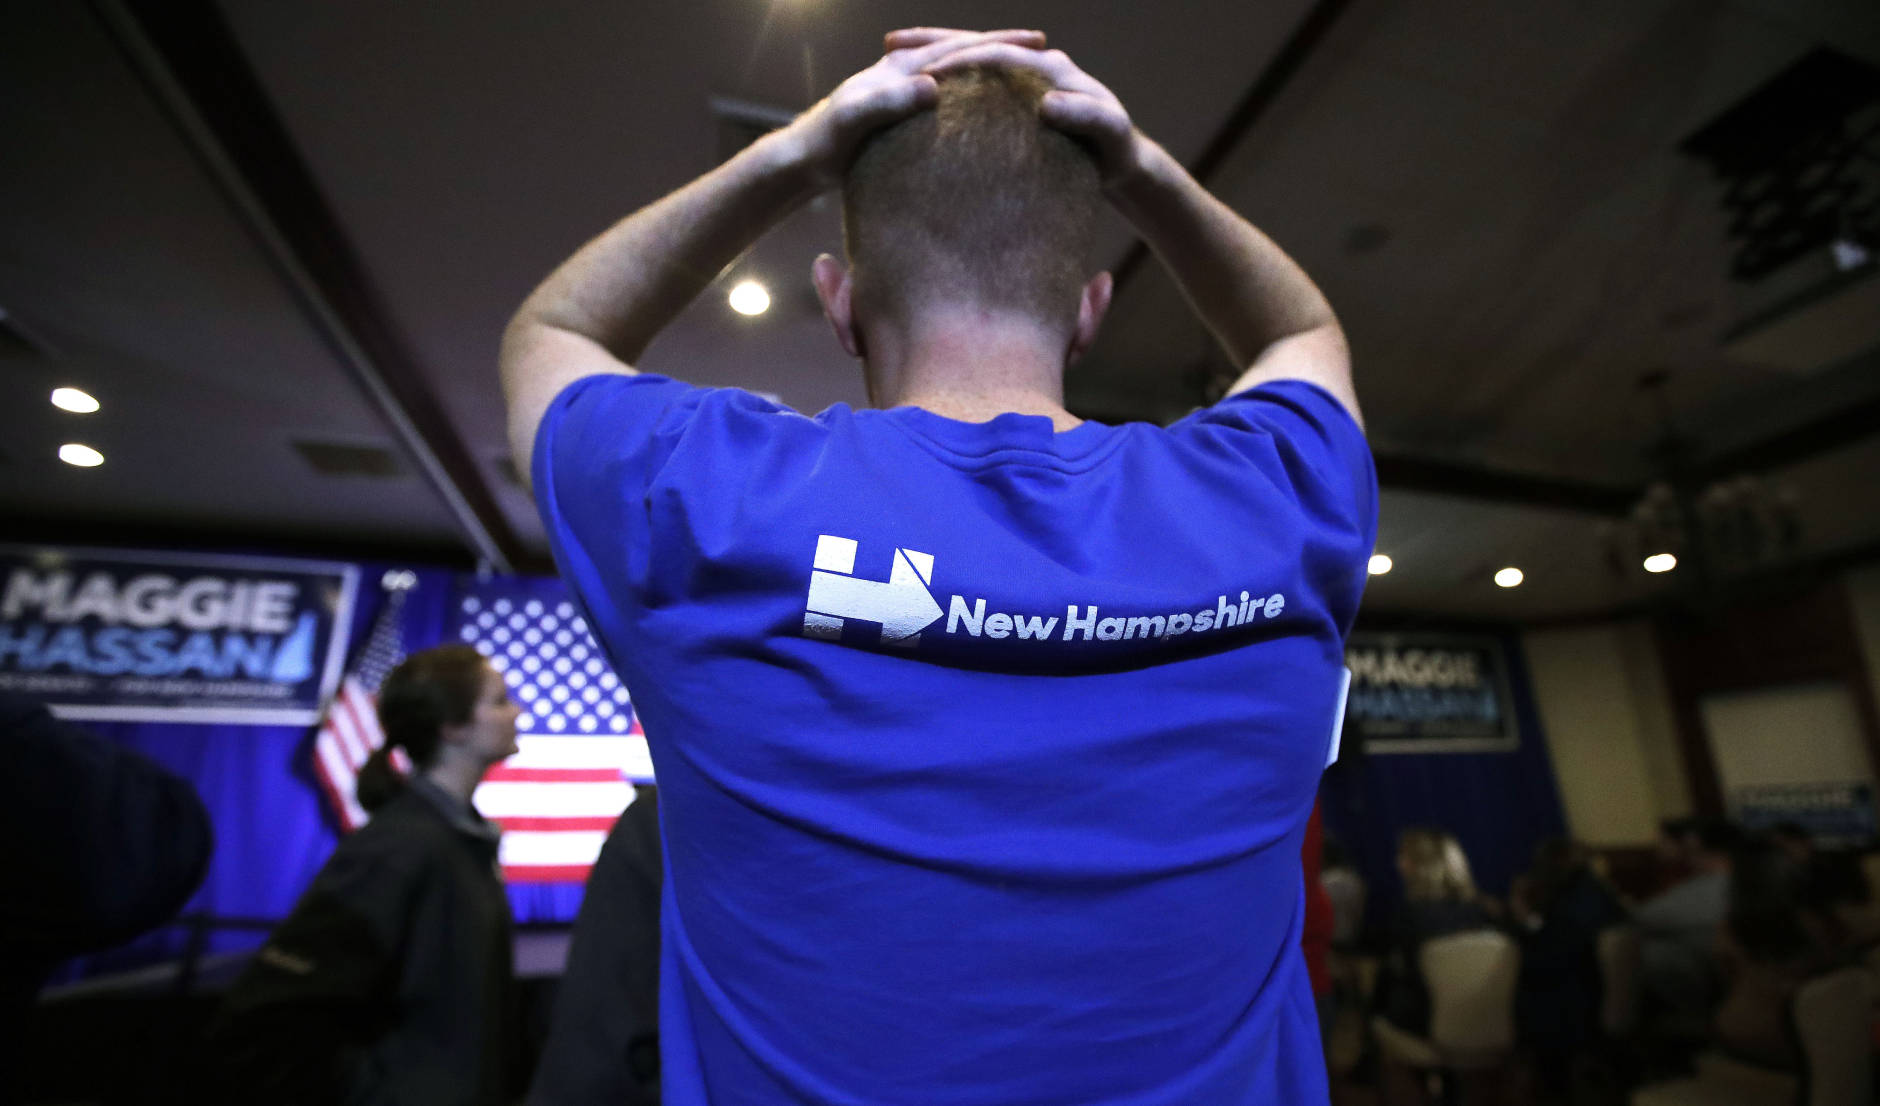 Matt Sanborn of Laconia, N.H., a Boston College student who volunteered for Democratic candidates including Hillary Clinton and New Hampshire Democratic Senate candidate, Gov. Maggie Hassan, rests his hands on the top of his head while watching election returns during an election night rally in Manchester, N.H., Tuesday, Nov. 8, 2016. (AP Photo/Charles Krupa)